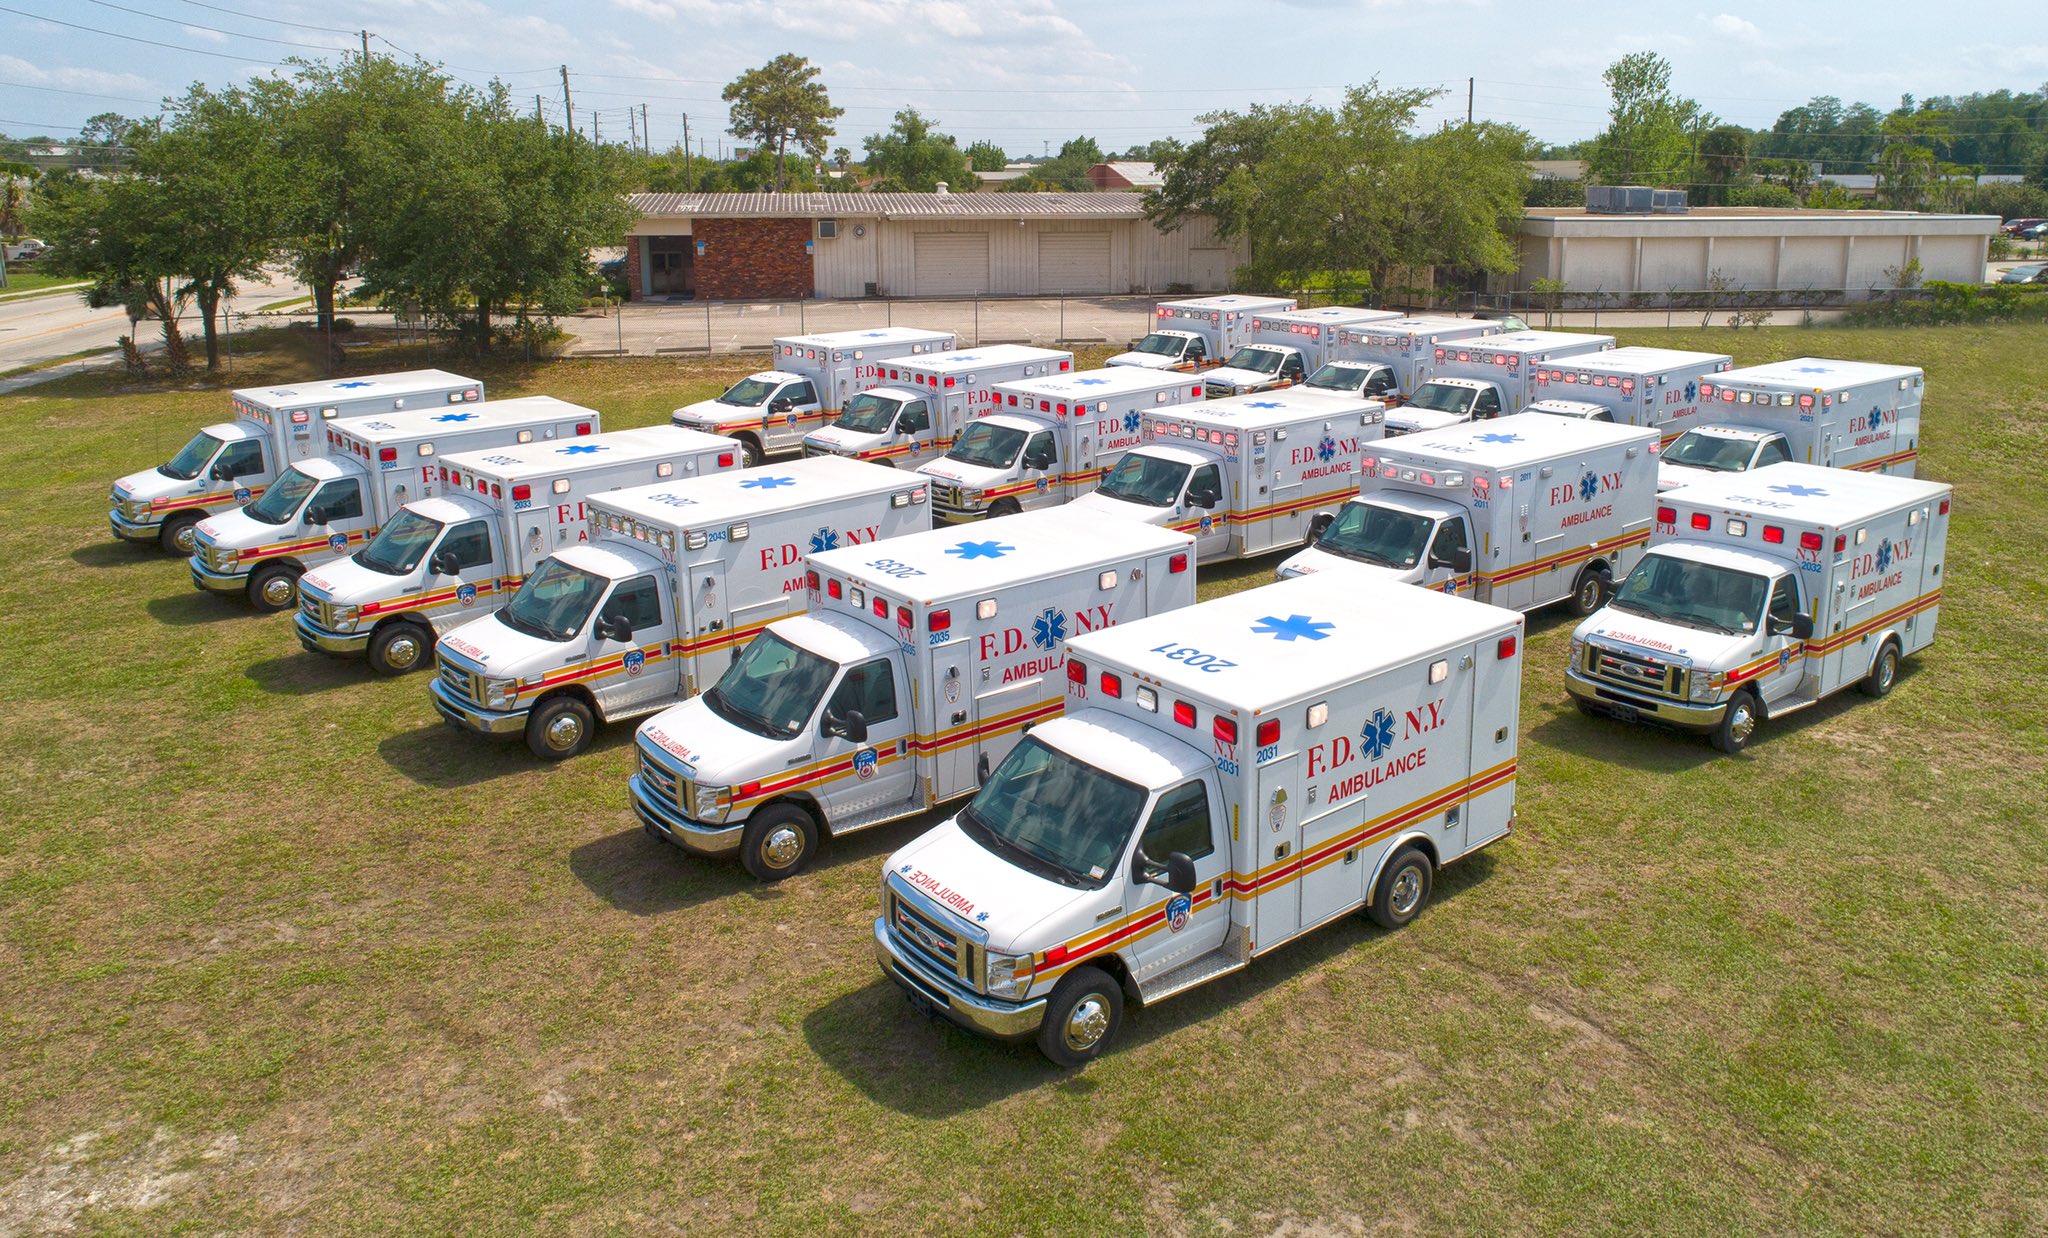 Ambulances leased by the New York City Fire Department. This image was released by the fire department on May 5.